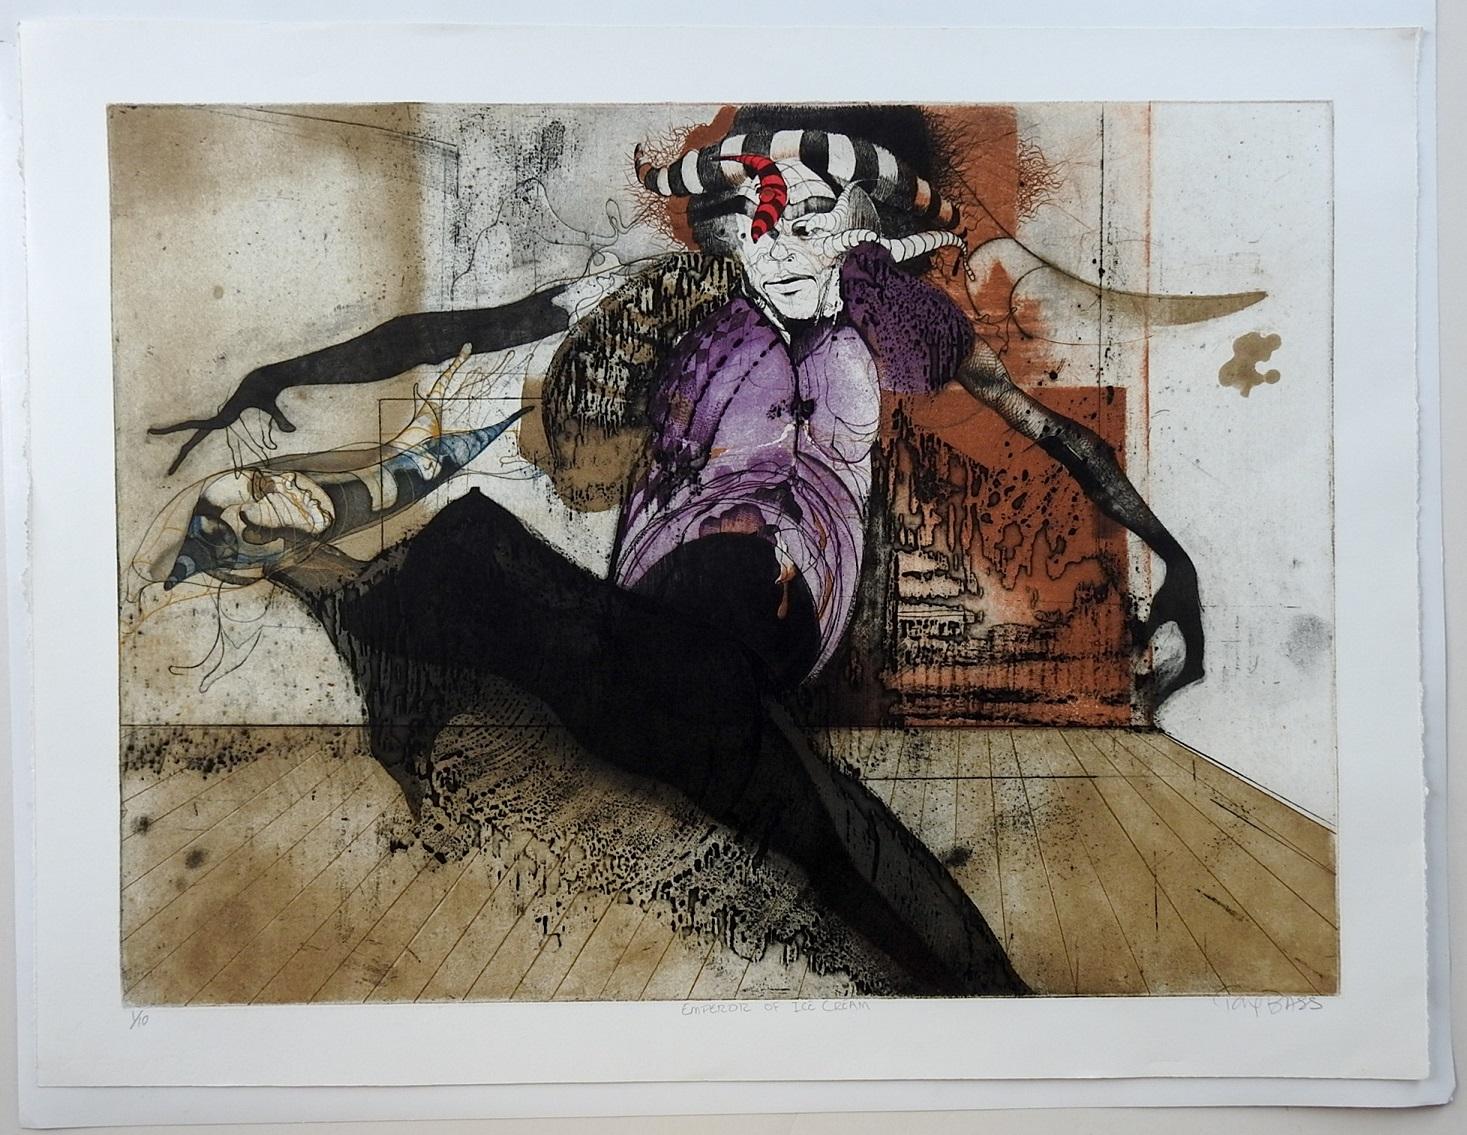 Circa 1970's abstract color etching on paper by Tony Bass ( b.1943) Texas. Signed, titled Emperor of Ice Cream and numbered 1/10 in pencil along lower margin. Abstract surreal figure in purple and black. Unframed.